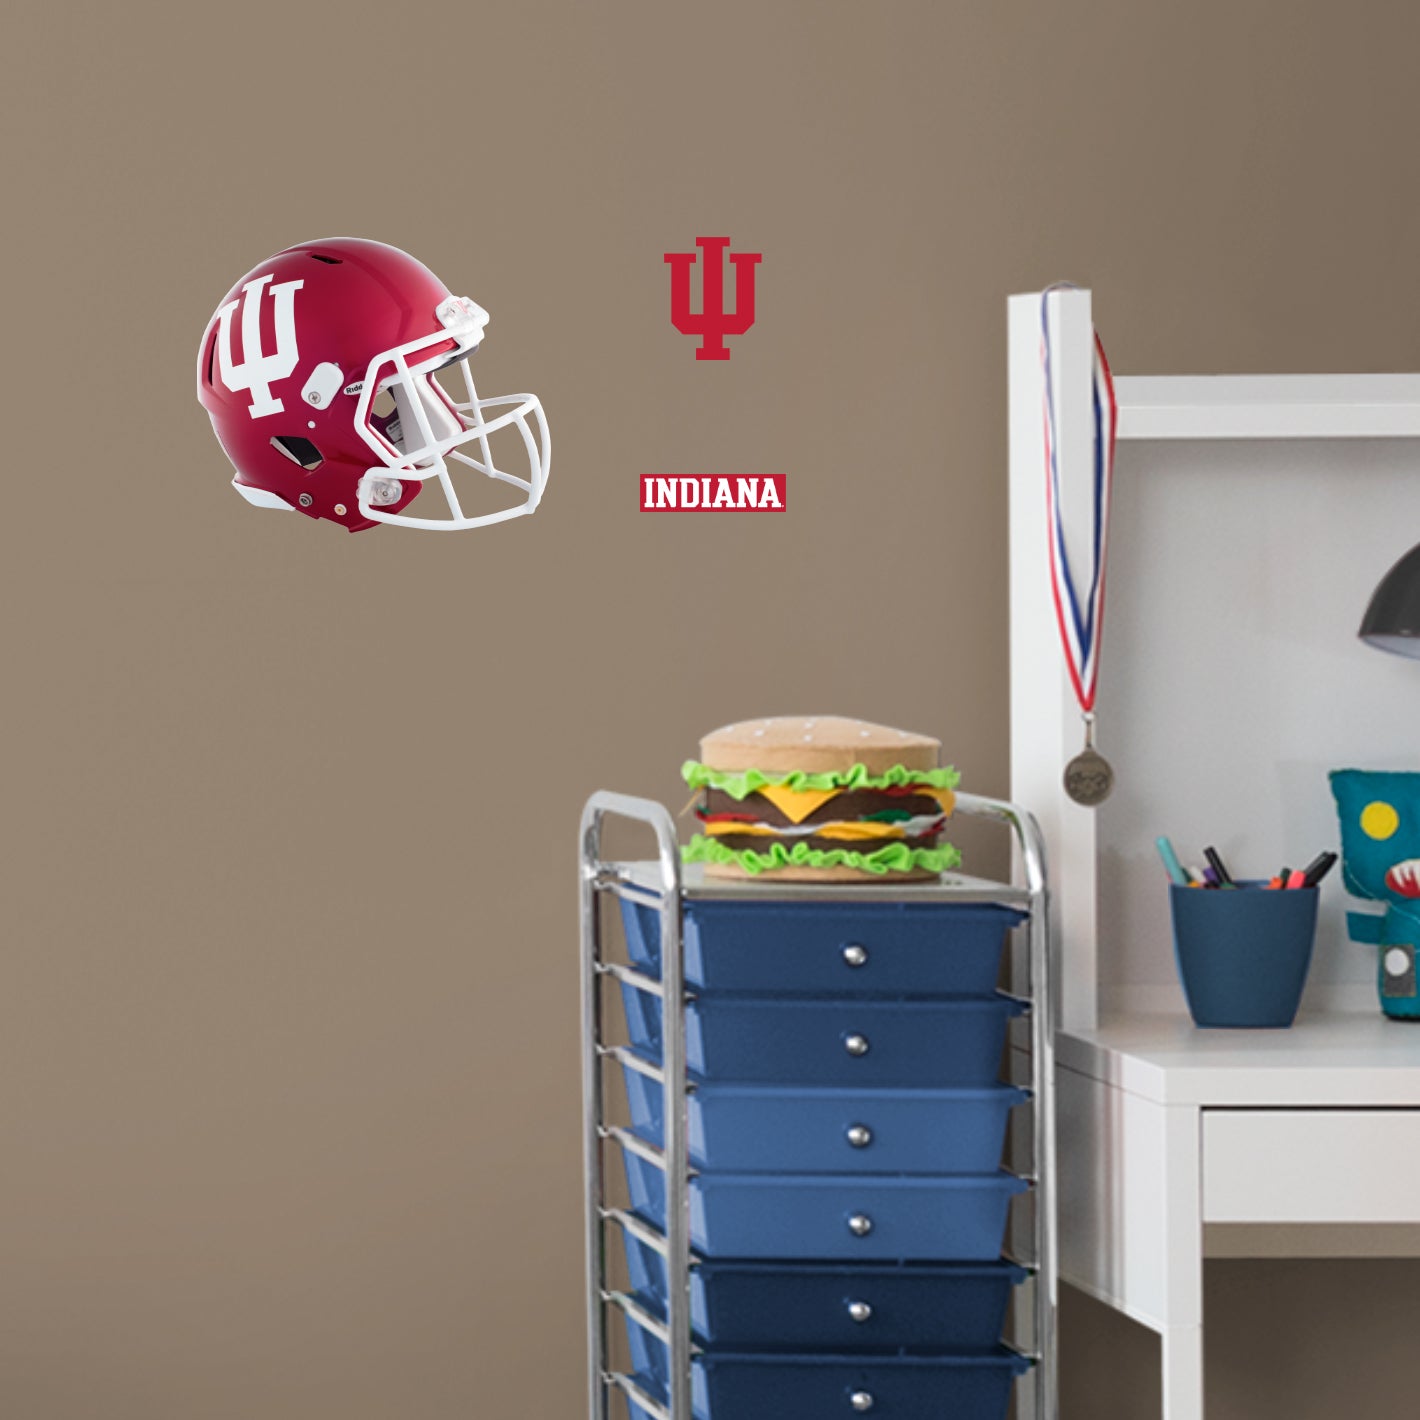 Indiana Hoosiers: Helmet - Officially Licensed NCAA Removable Adhesive Decal